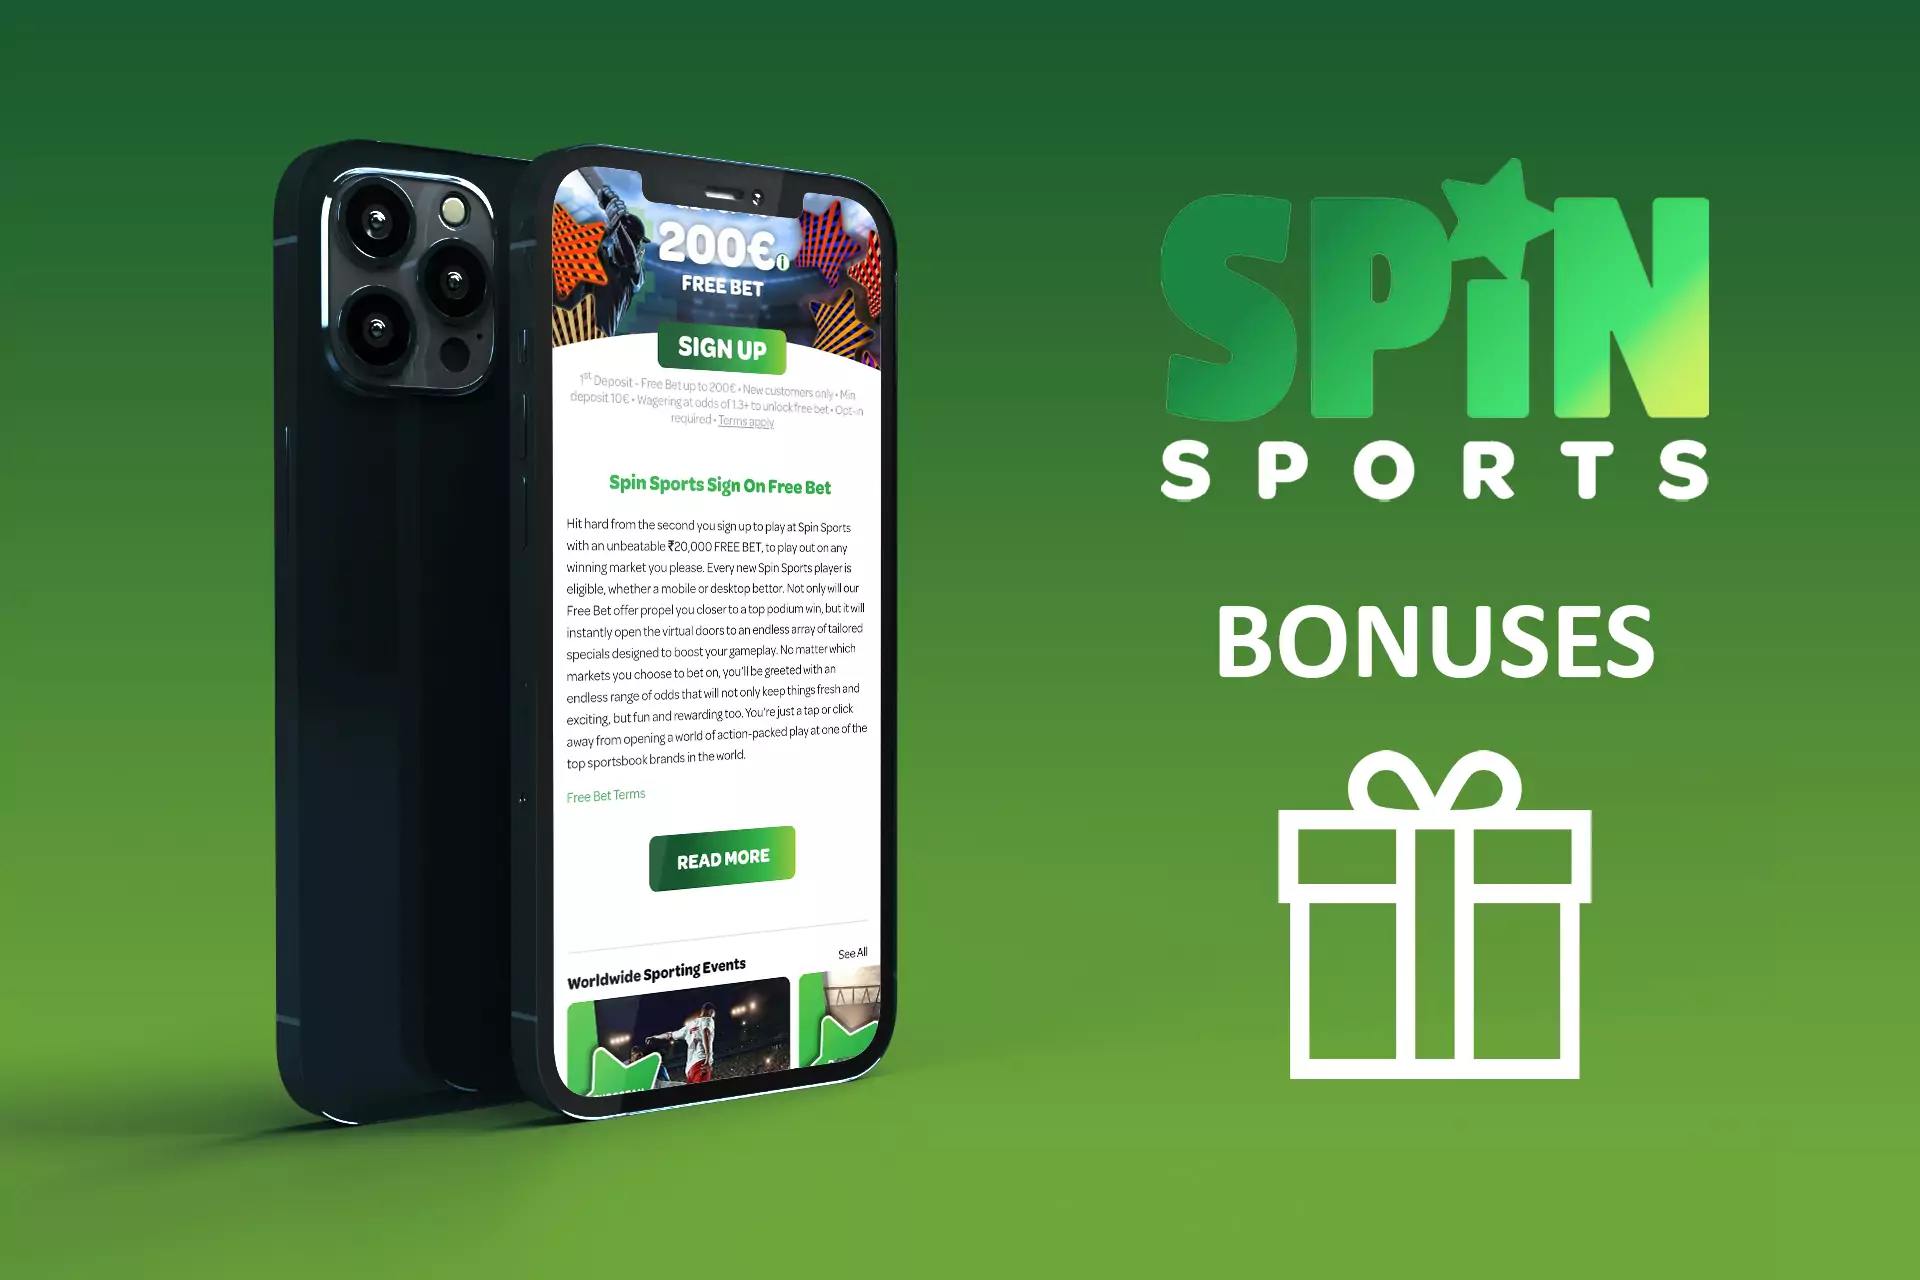 There are some welcome bonuses for new users on Spin Sports.